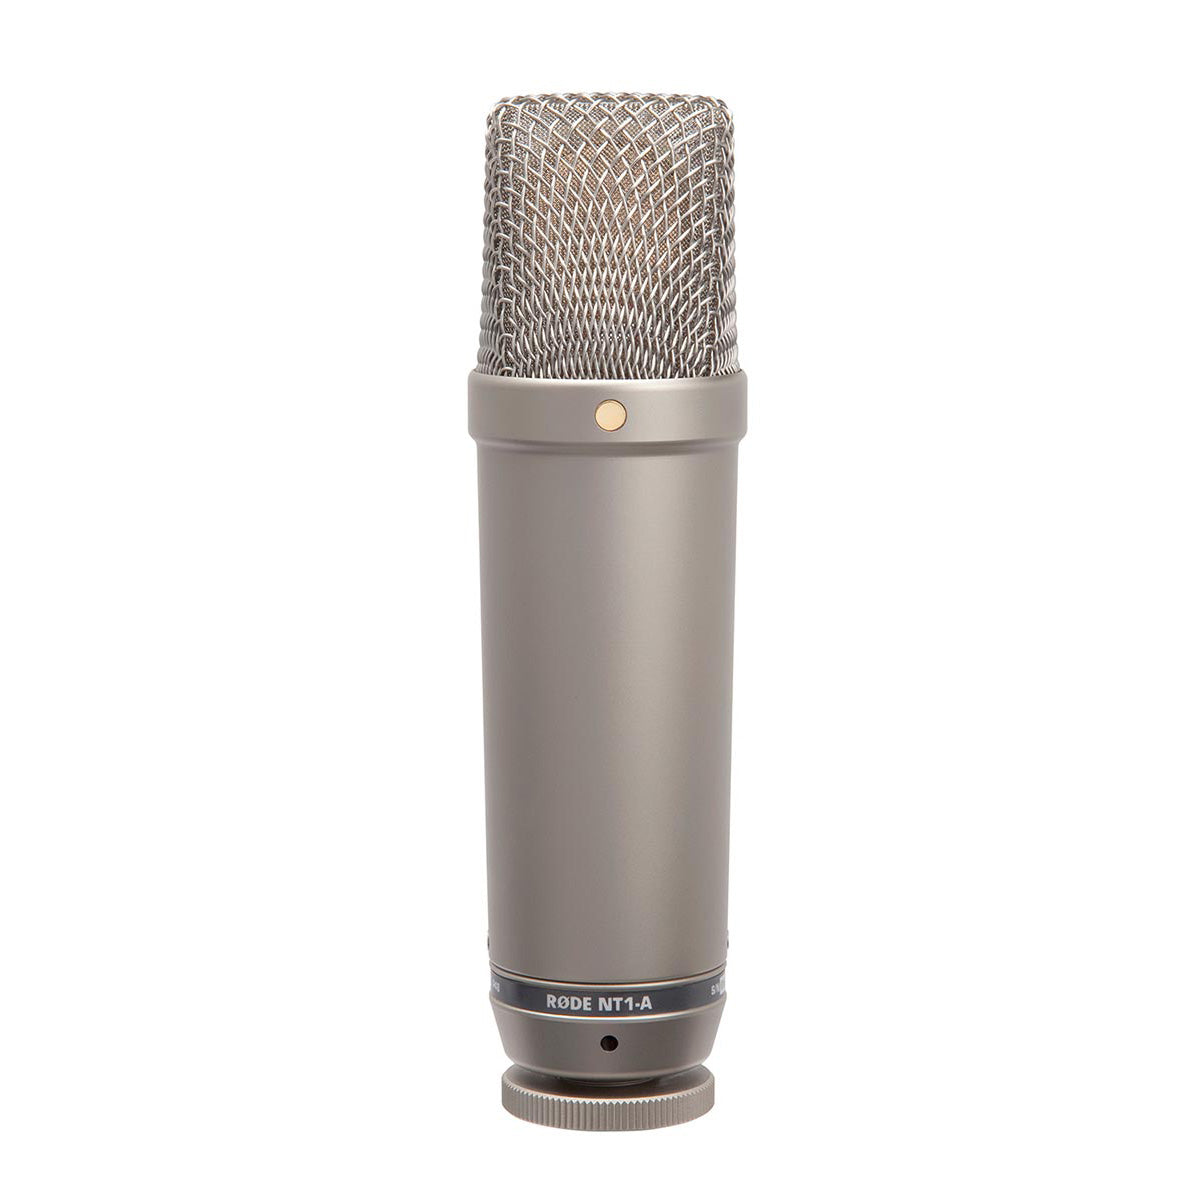 RODE NT1-A Large Condenser Microphone